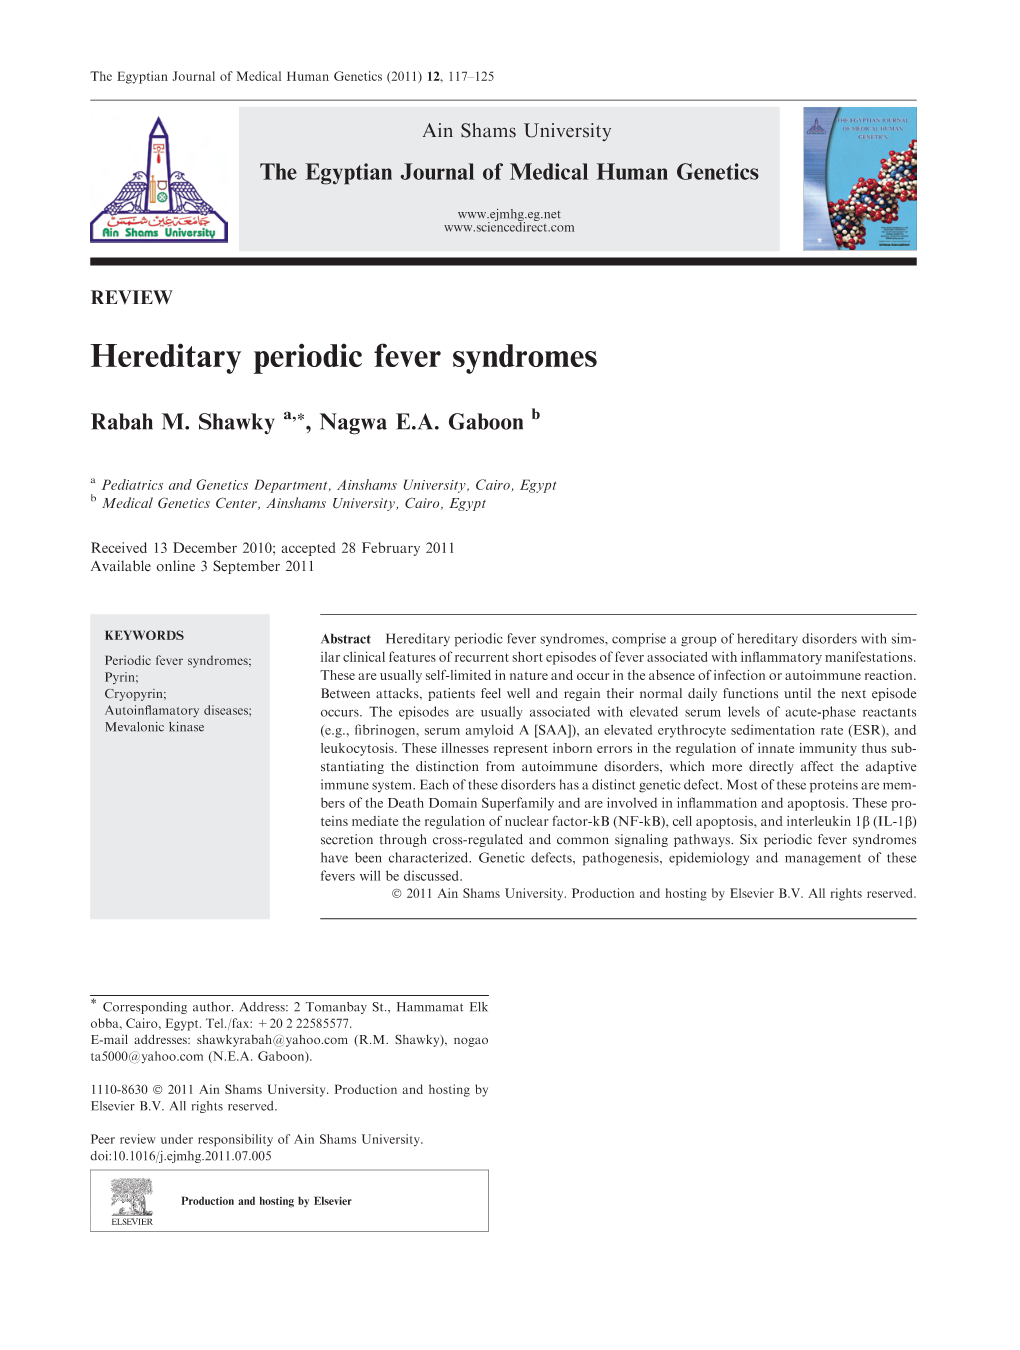 Hereditary Periodic Fever Syndromes